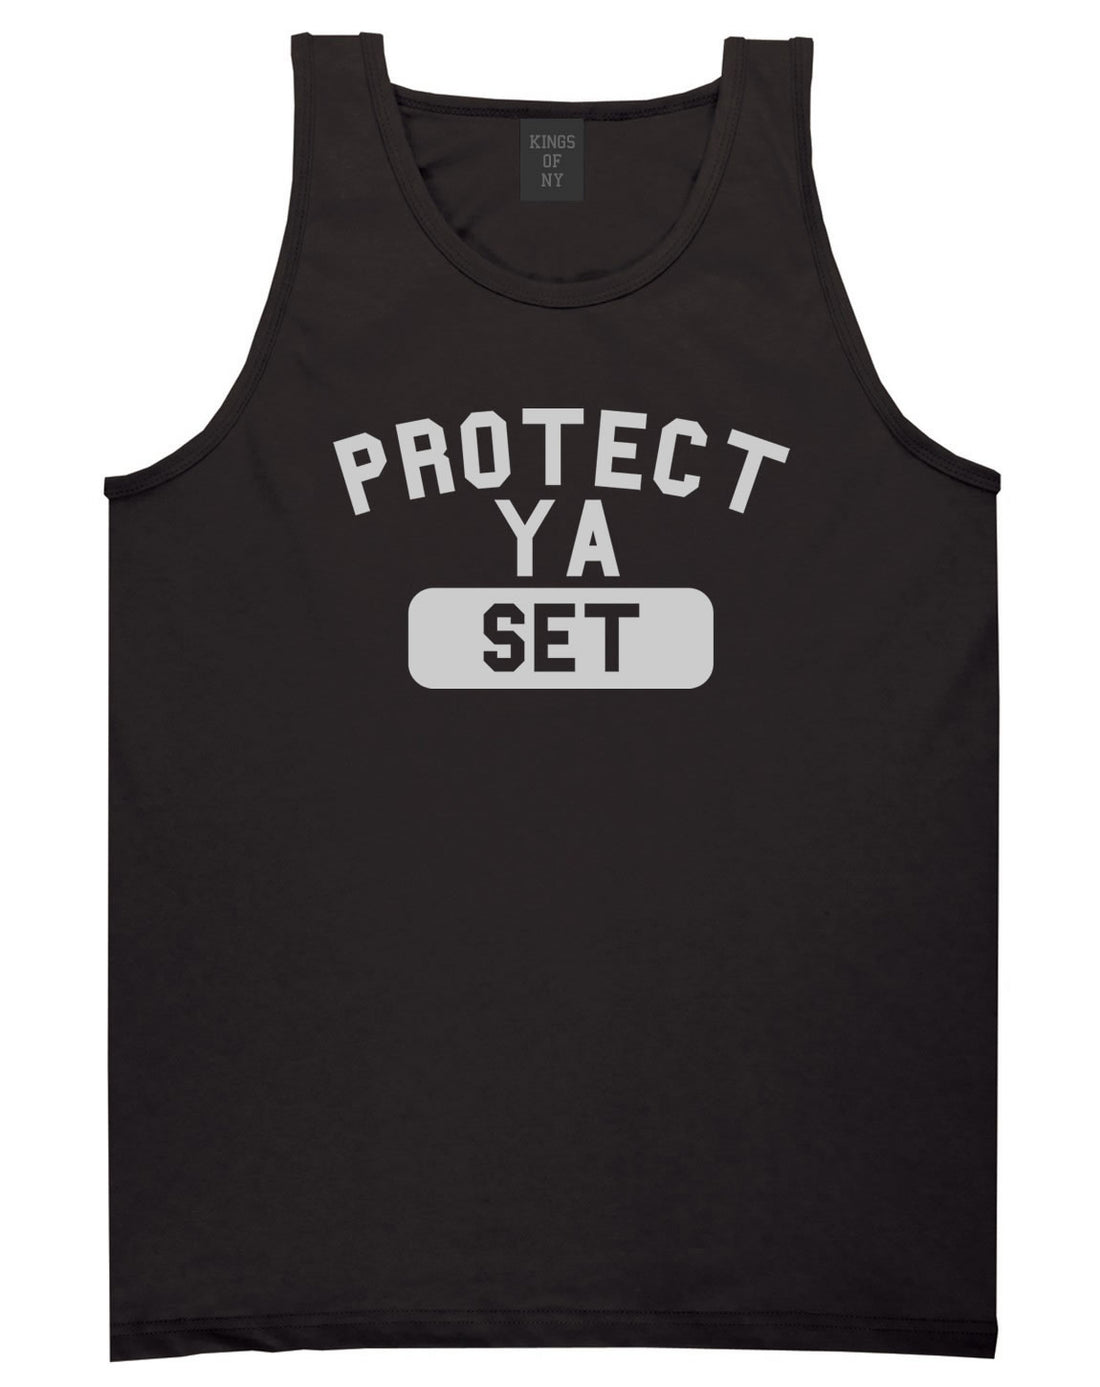 Protect Ya Set Neck Tank Top in Black By Kings Of NY